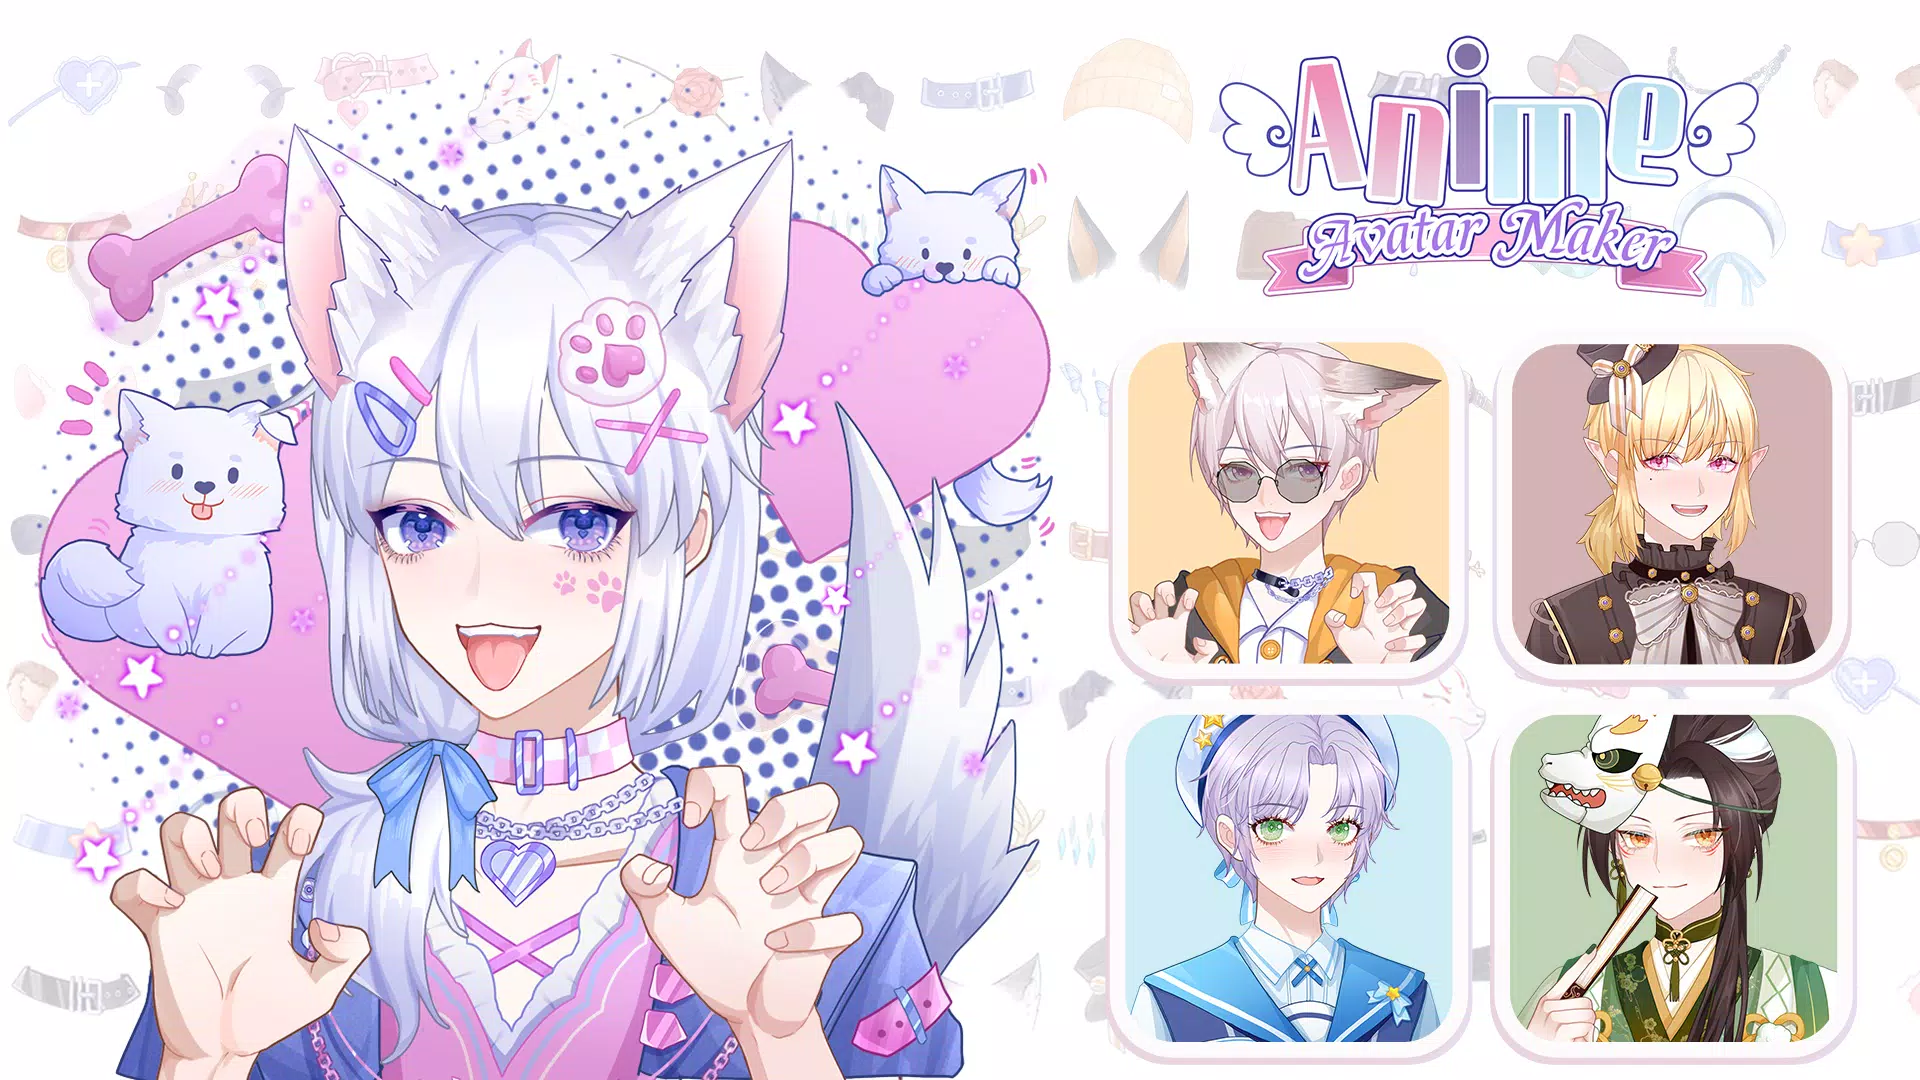 Anime Avatar maker : Anime Character Creator APK for Android - Download